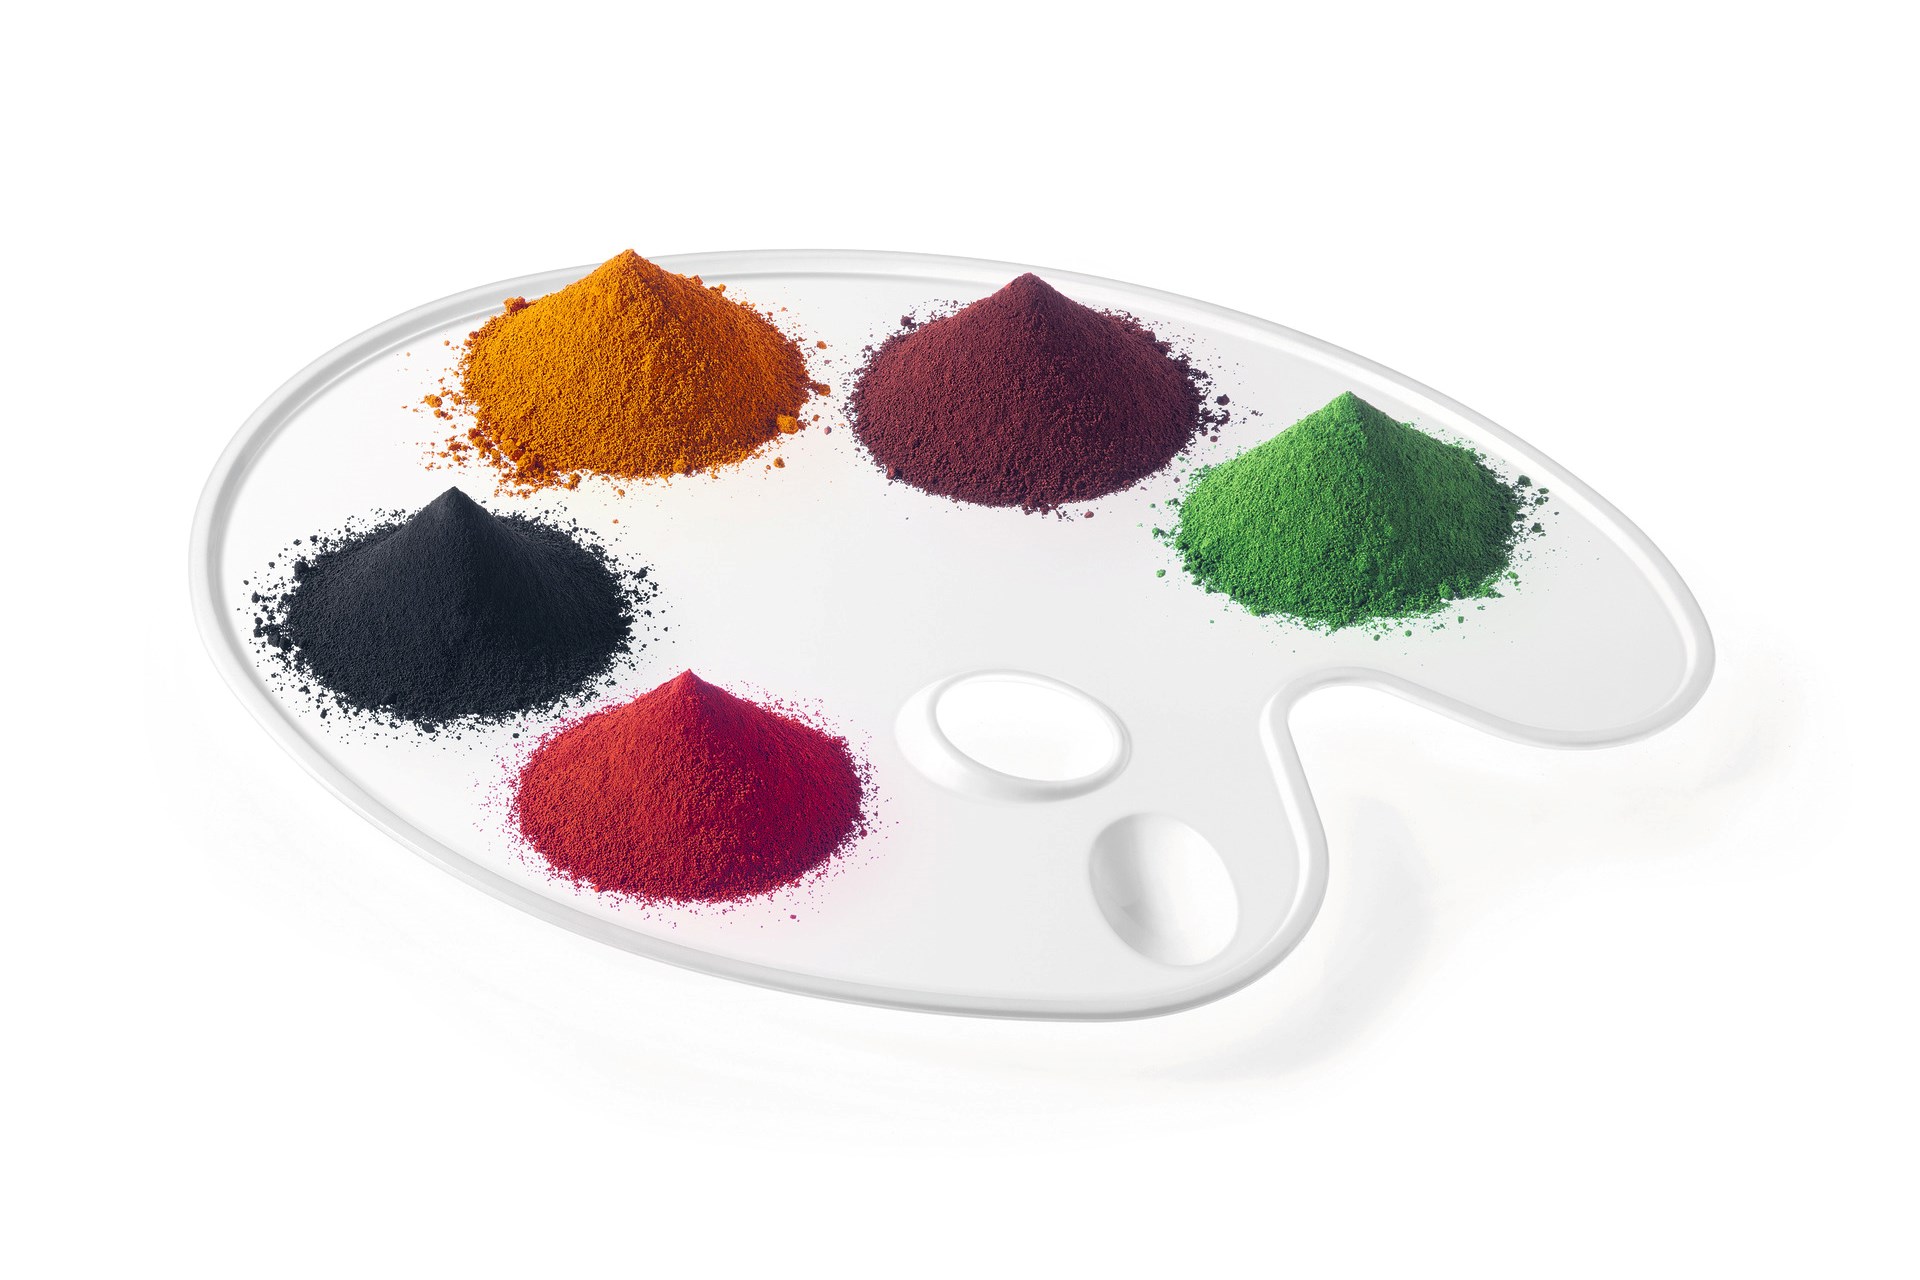 Inorganic pigments of the IPG business unit with the products Bayferrox, Bayoxide and Colortherm